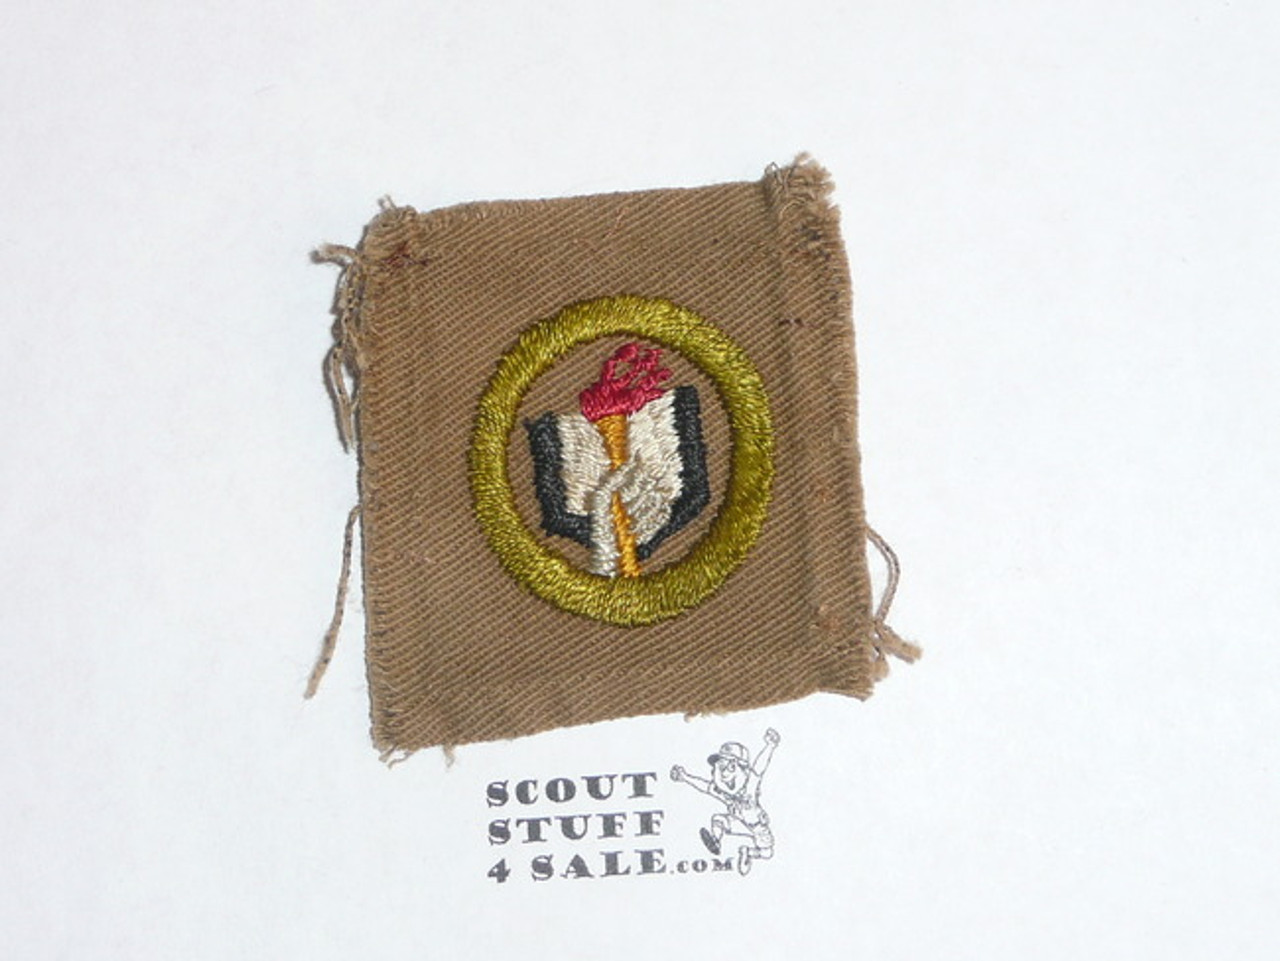 Scholarship - Type A - Square Tan Merit Badge (1911-1933), used, black stripe with scout emblem on back